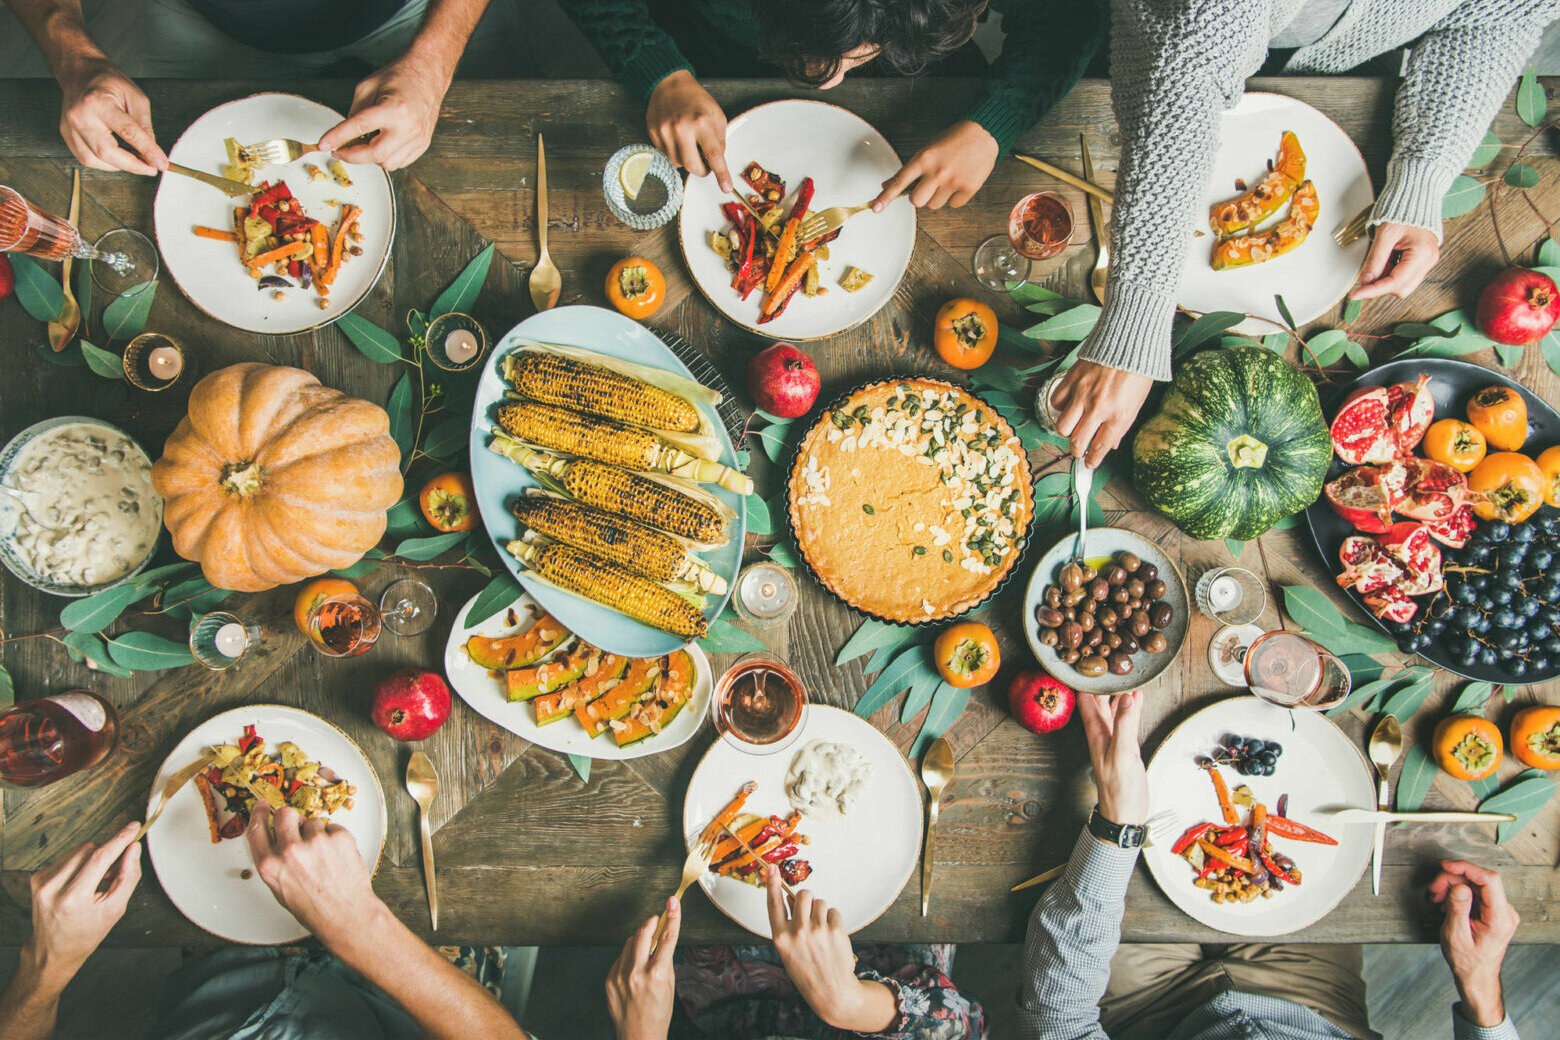 Worried about managing your eating this holiday season? Keep these tips in mind